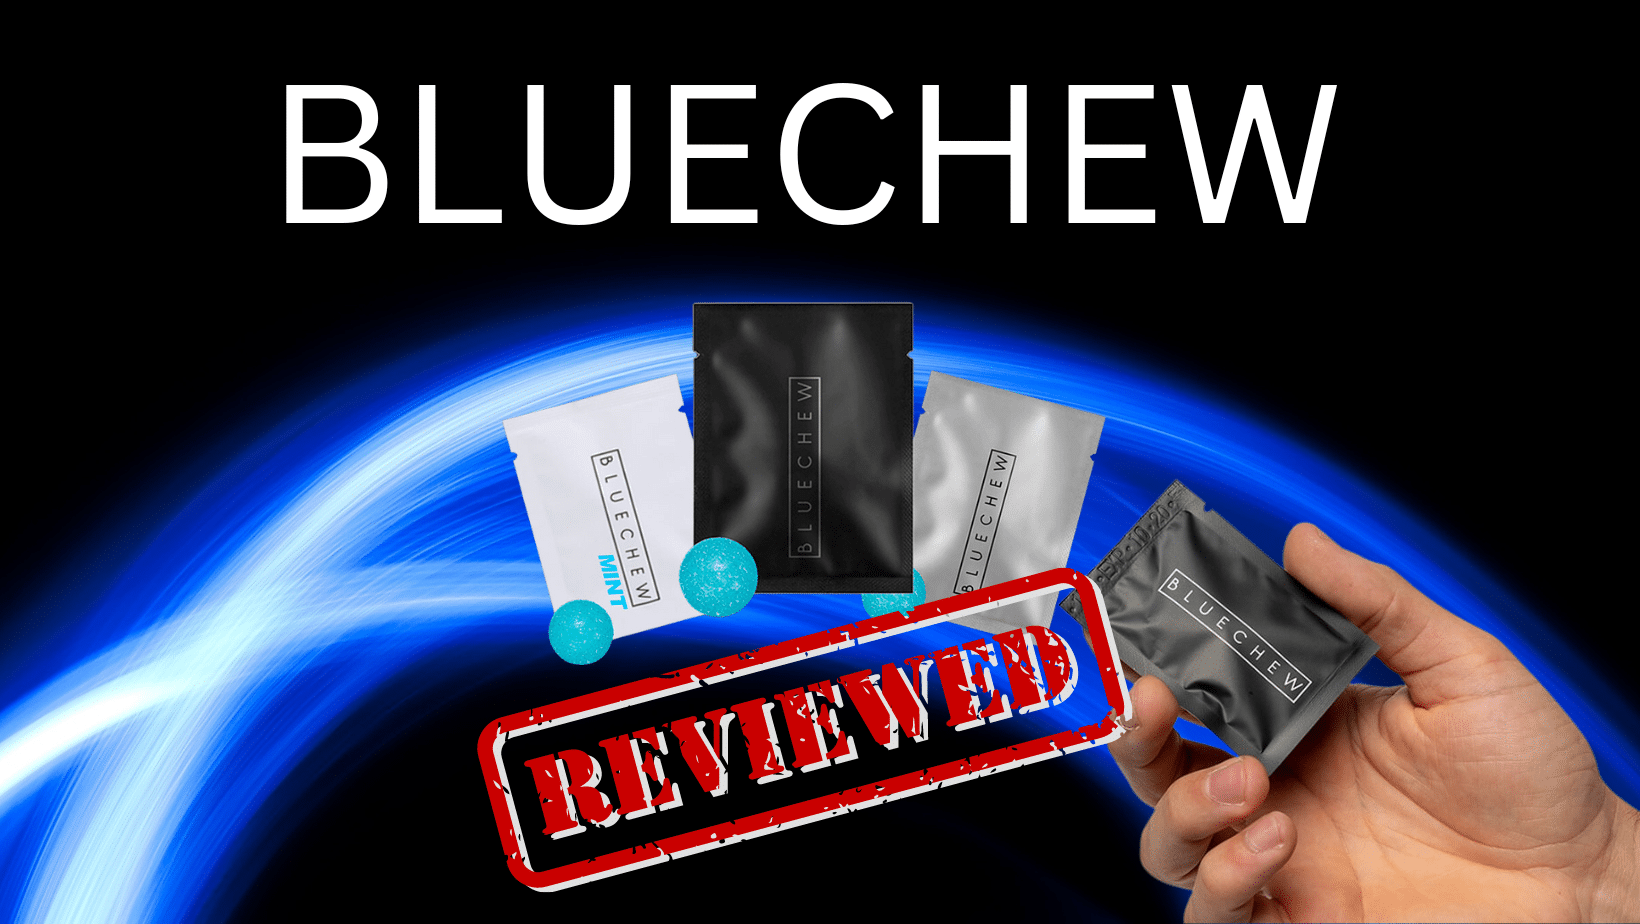 BlueChew Review – Is it Legit, and Works?